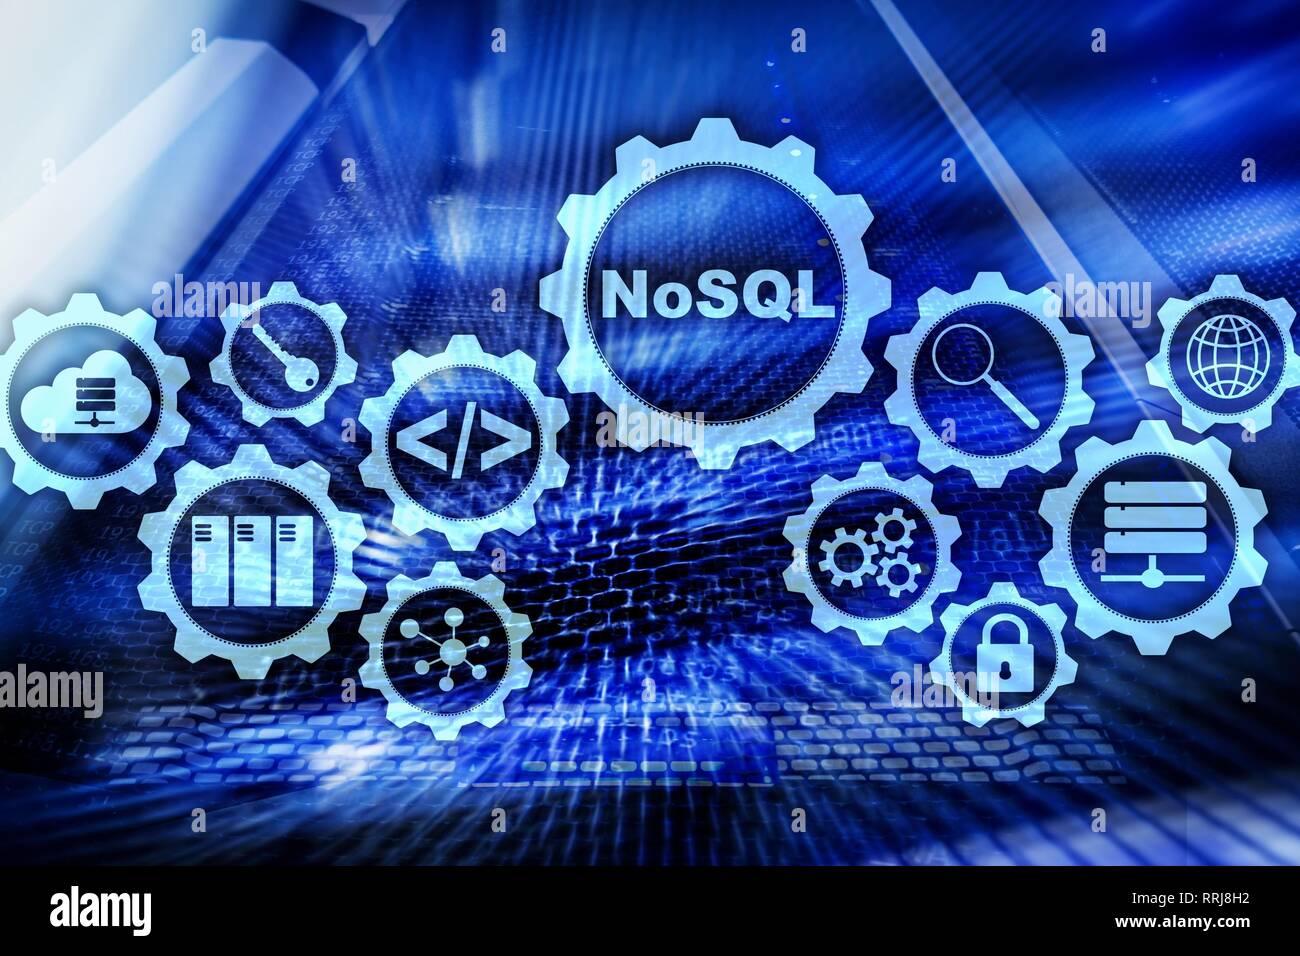 NoSQL. Structured Query Language.Database Technology Concept. Server room background Stock Photo